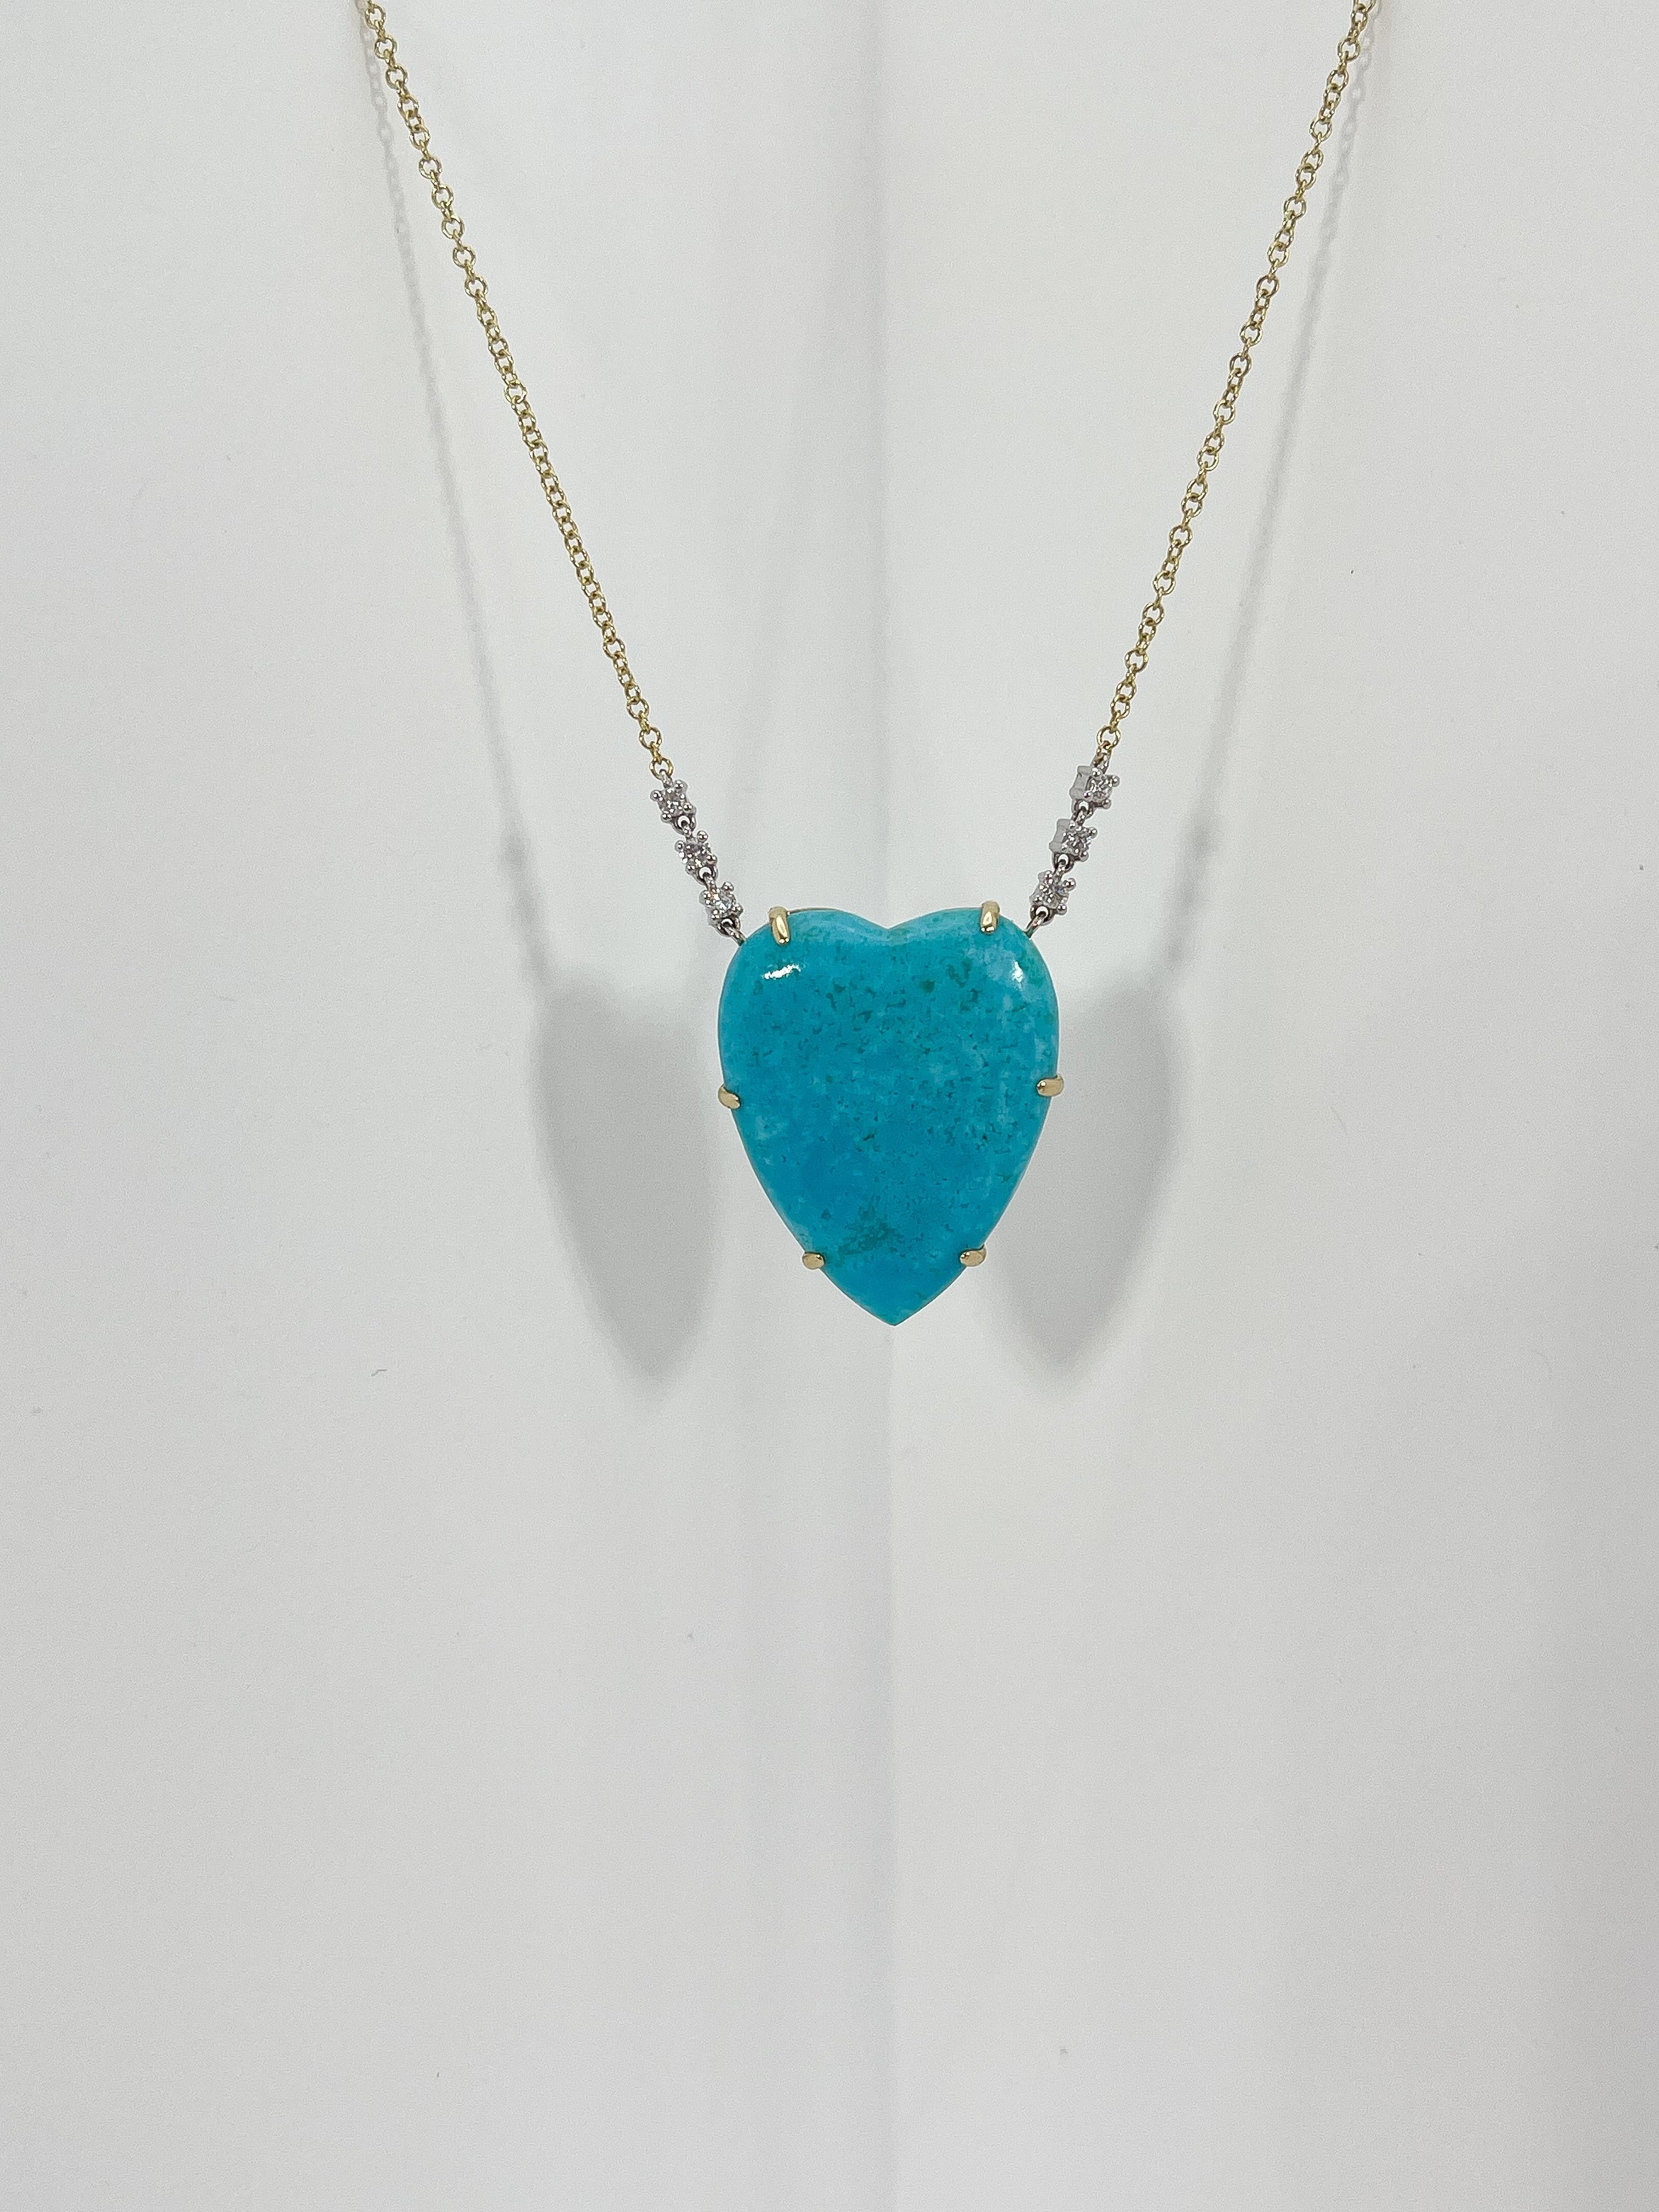 14k two toned turquoise heart and diamond necklace. Heart measures 23.8 x 19.5 mm,  3 round diamonds connecting to the heart on both sides of chain, the length of the necklace is 16 inches with an extension at 17'' and 18'', and the total weight of